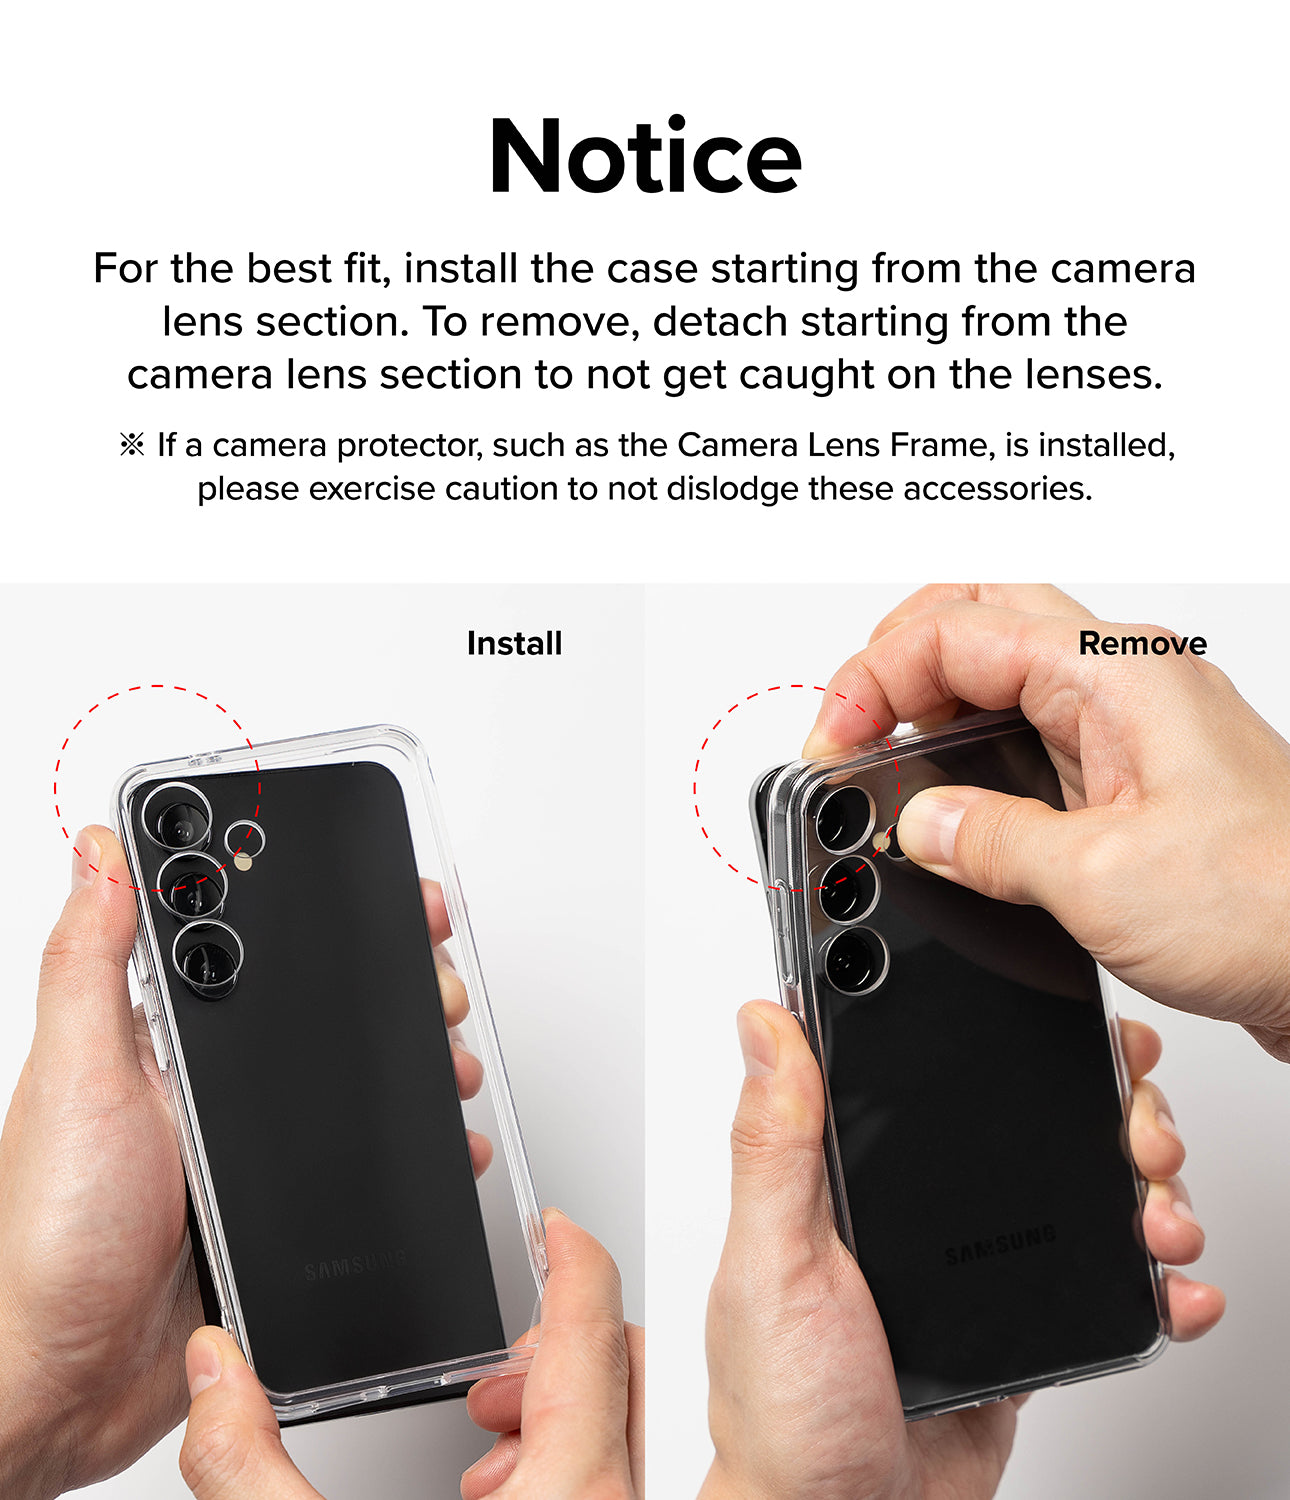 Galaxy S24 Plus Case | Fusion Magnetic - Notice. For the best fit, install the case starting from the camera lens section. To remove, detach starting from the camera lens section to not get caught on the lenses.